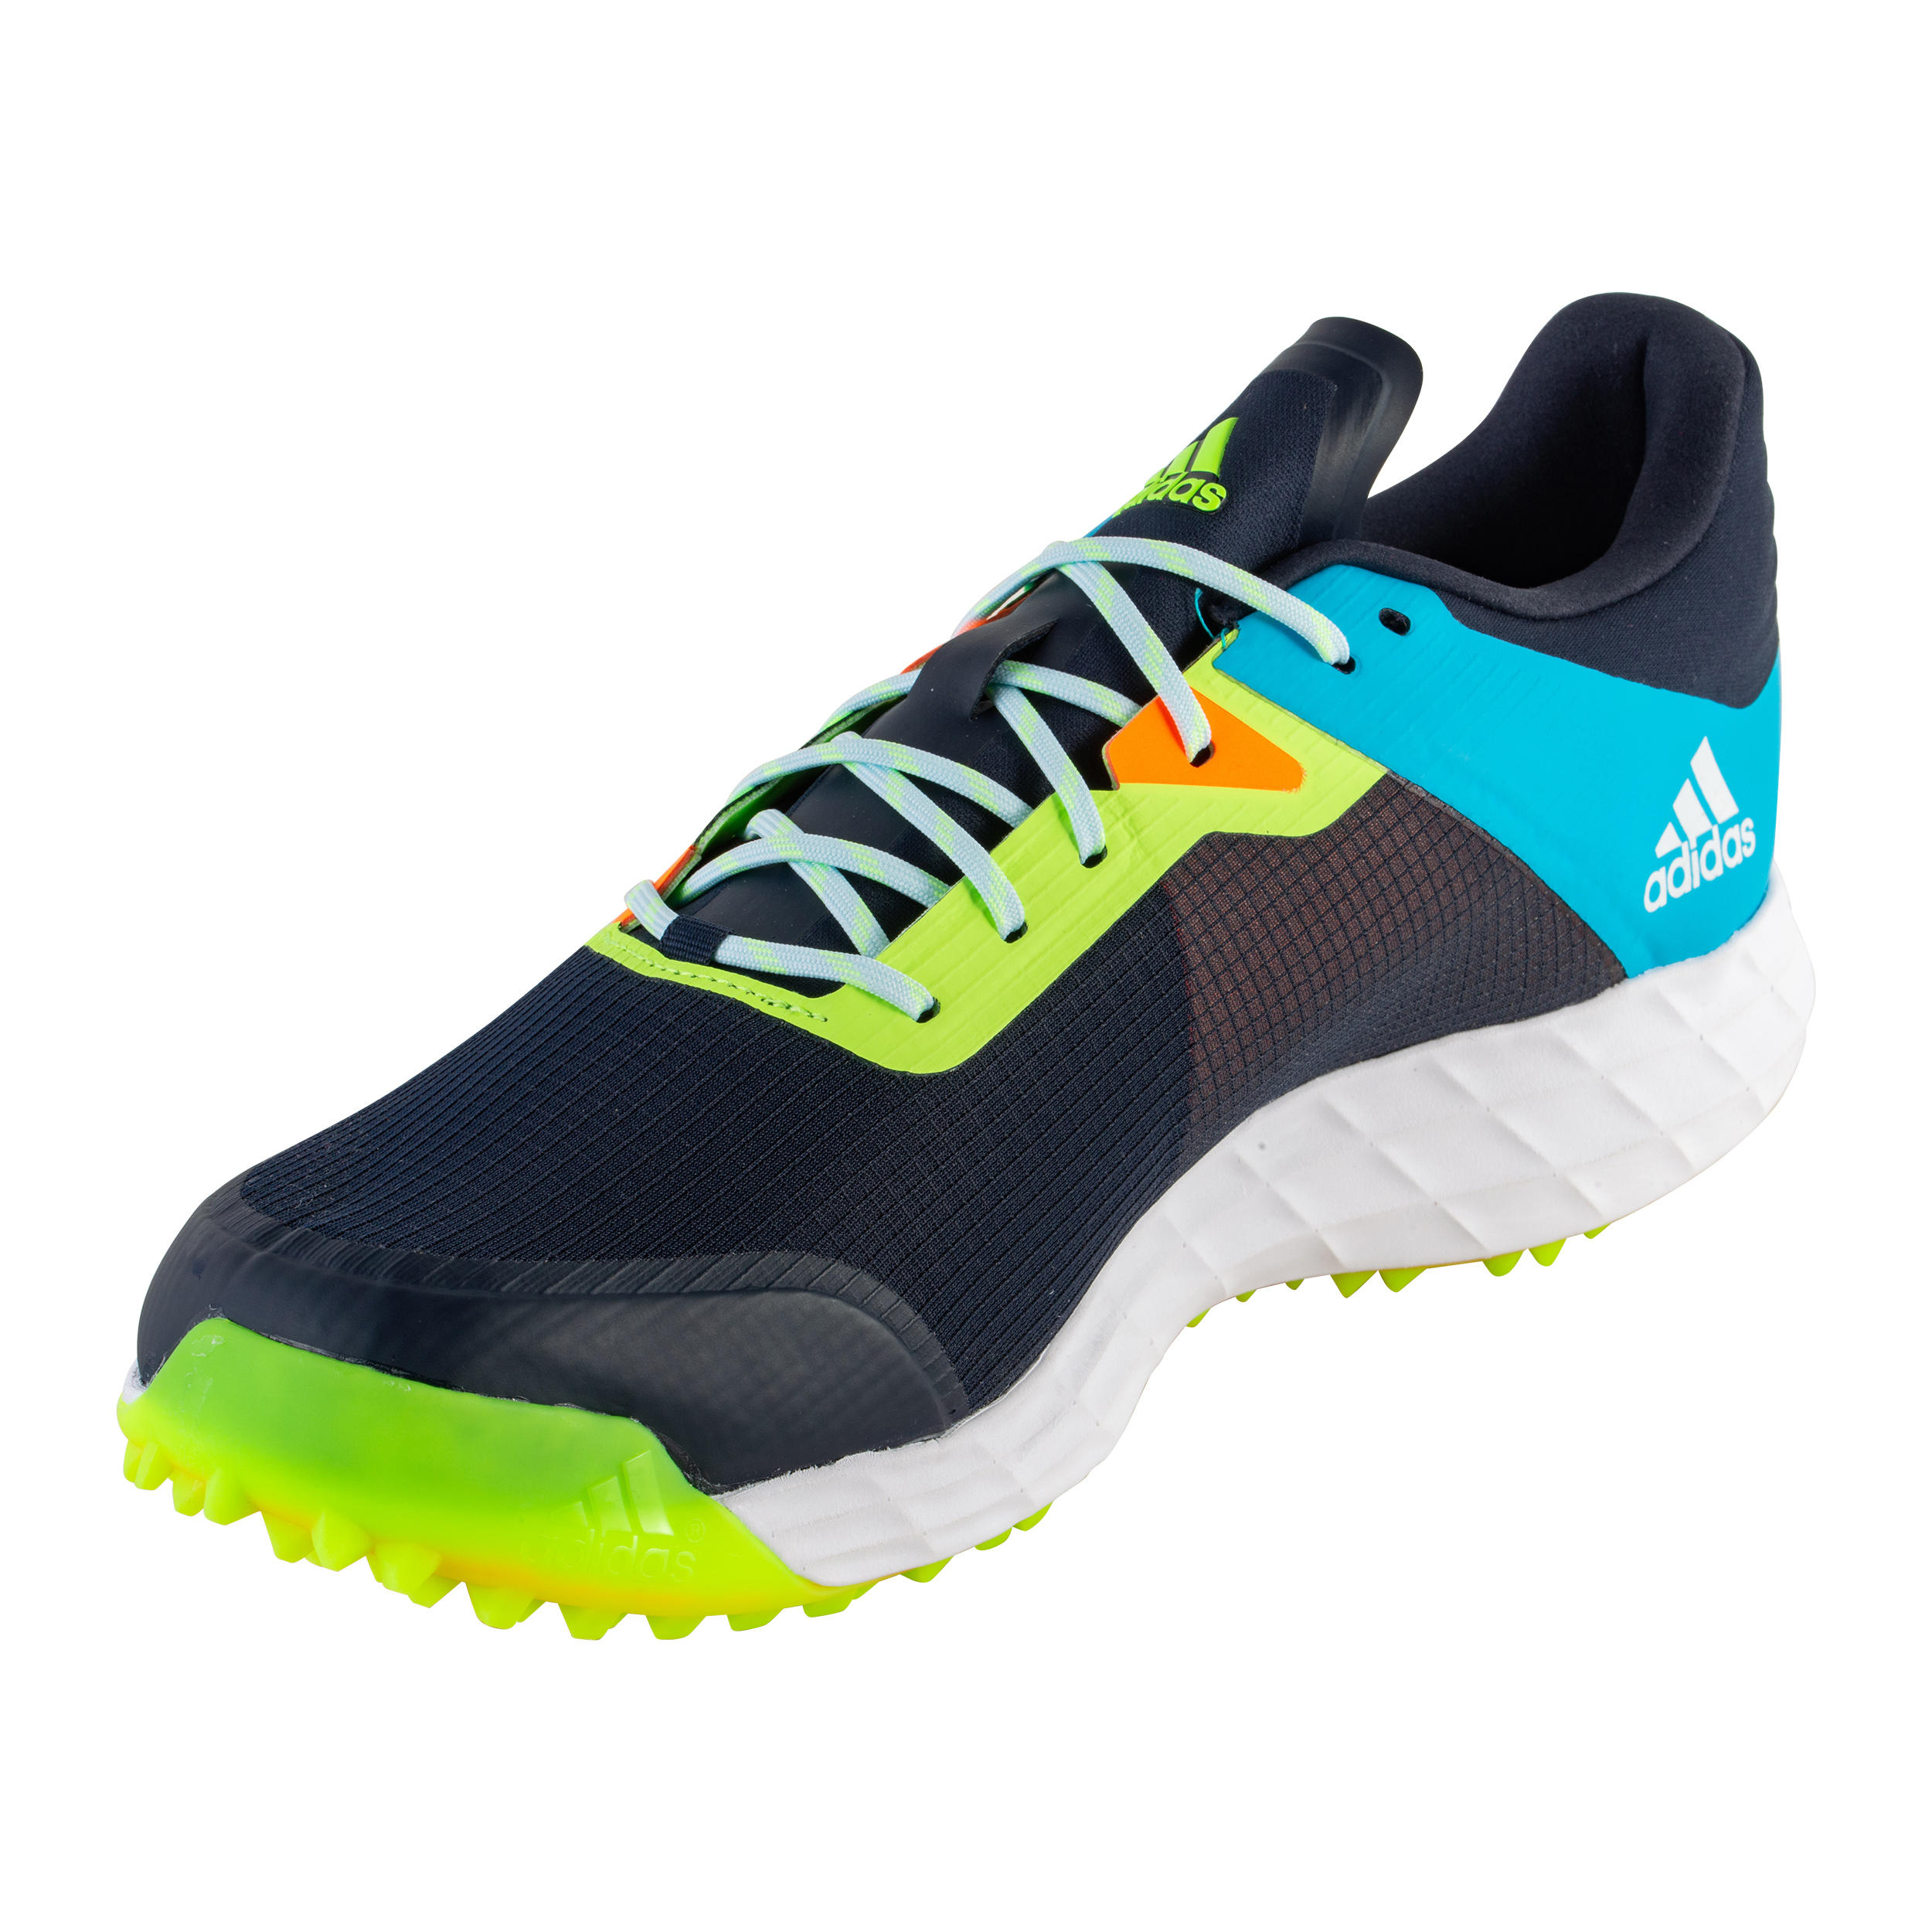 Adult High-Intensity Field Hockey Shoes Lux 1.9S - Blue 7/7